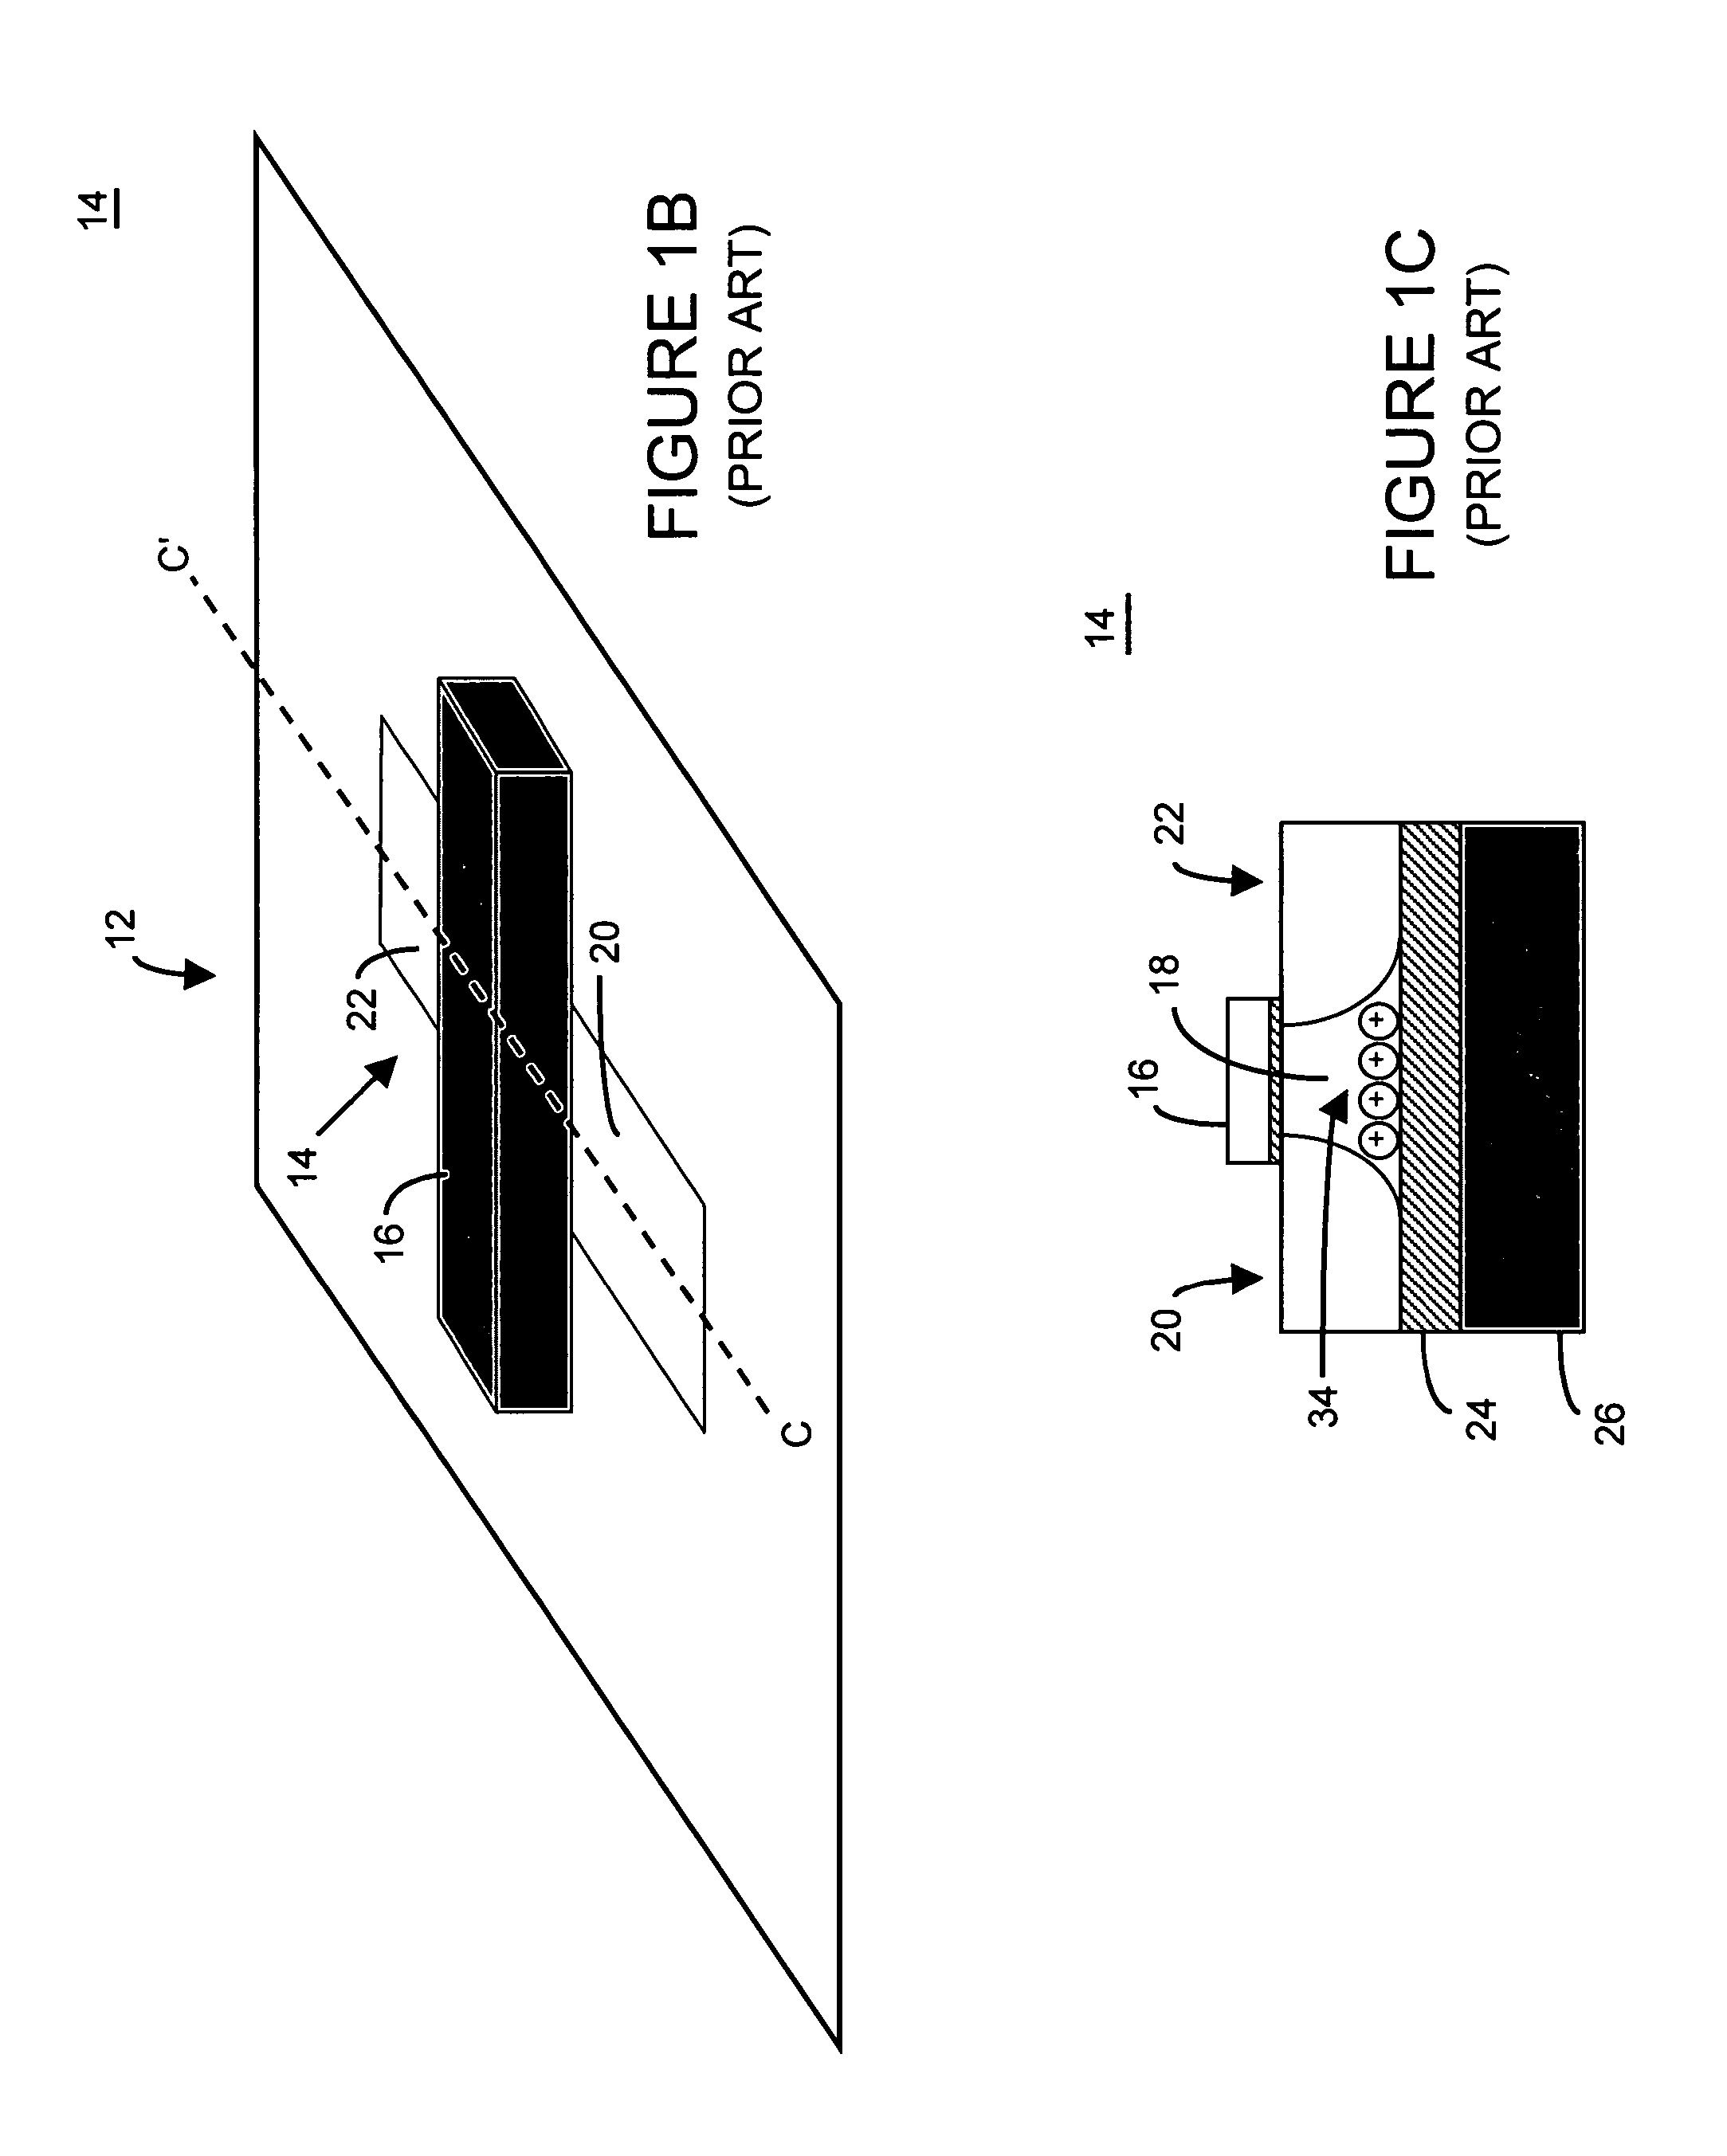 Memory cell having an electrically floating body transistor and programming technique therefor